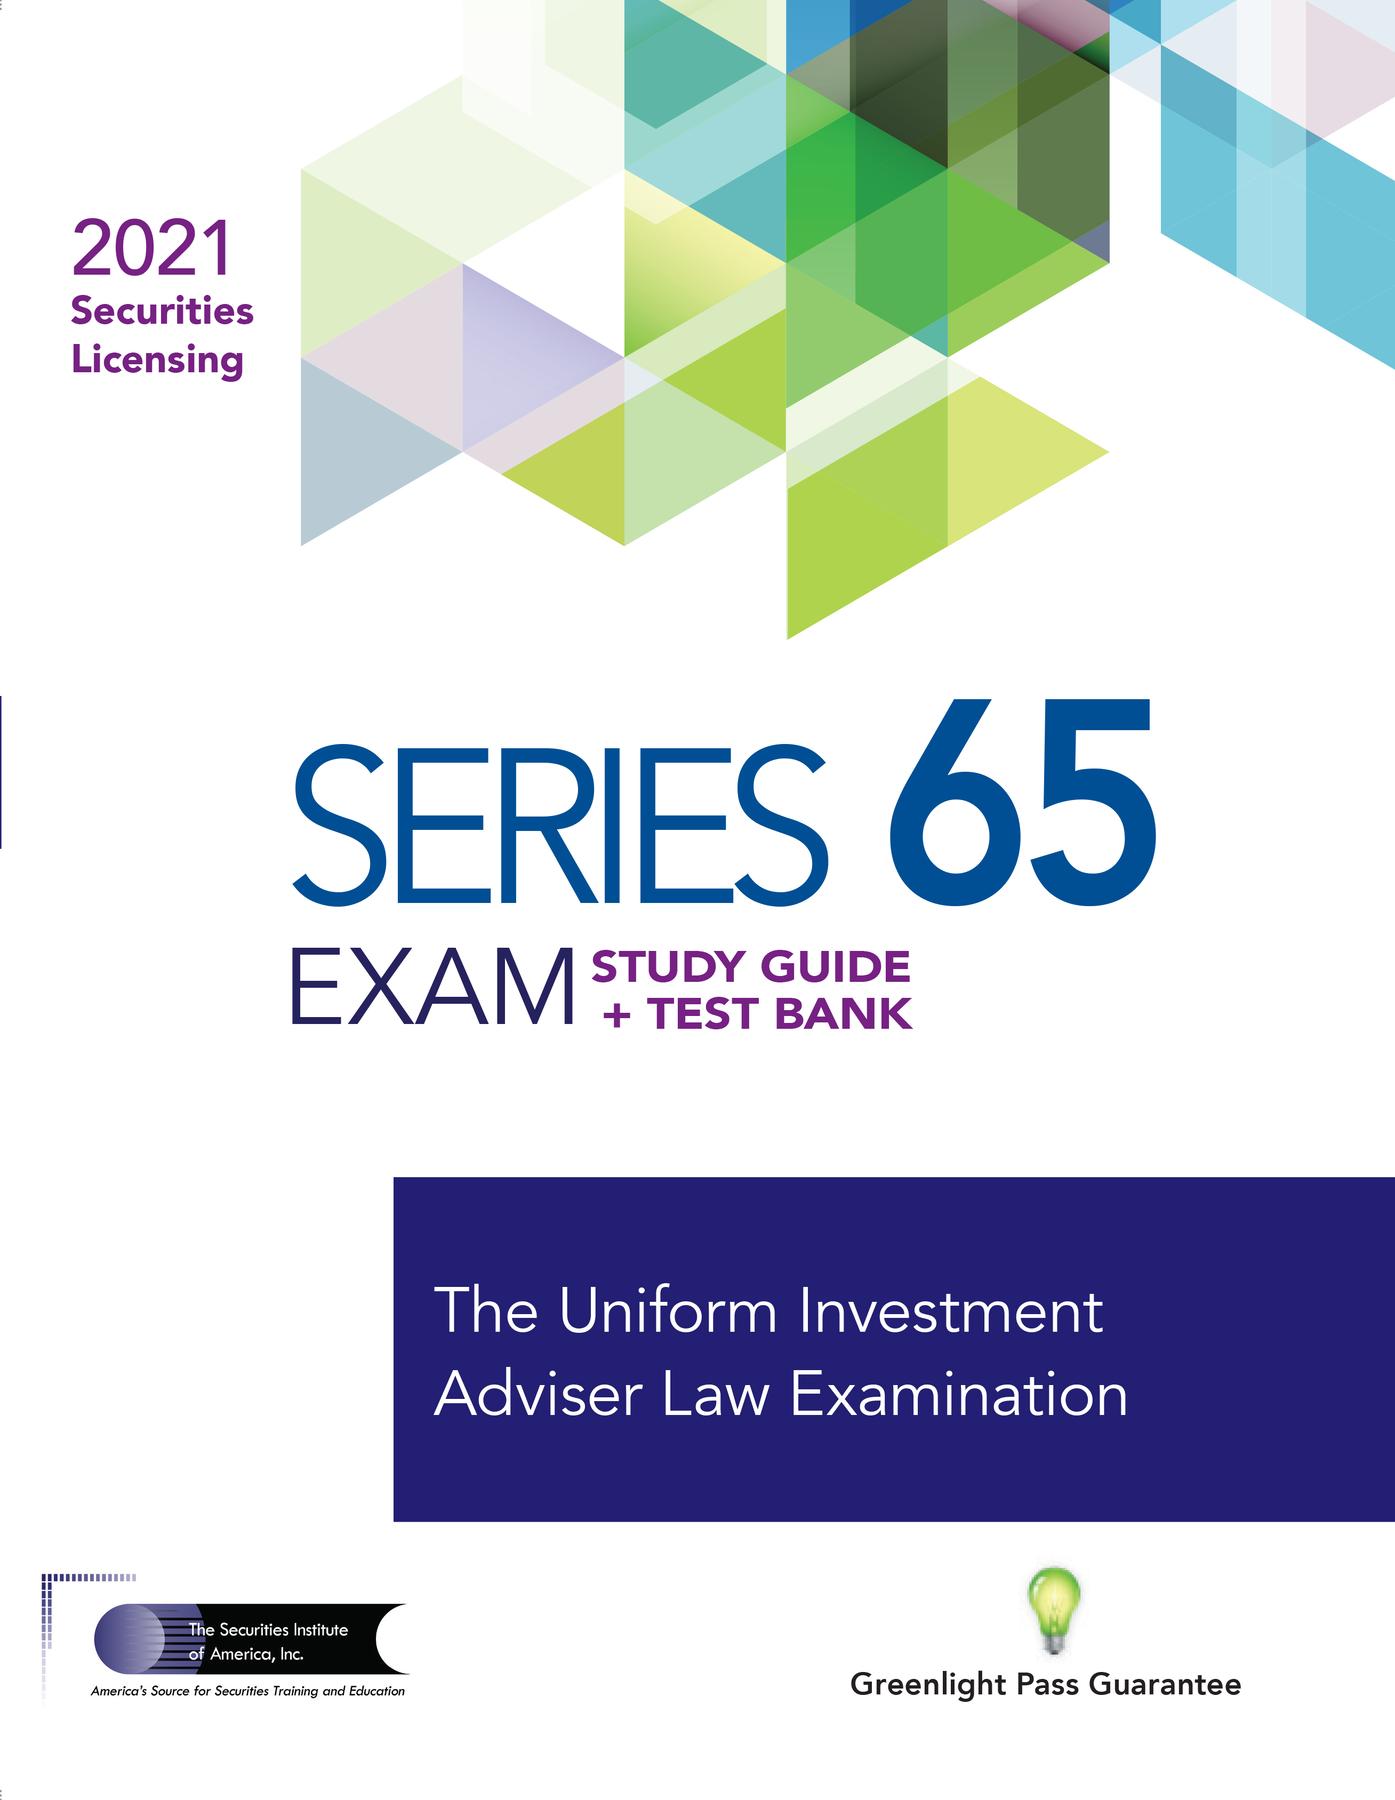 SERIES 65 EXAM STUDY GUIDE 2021 + TEST BANK